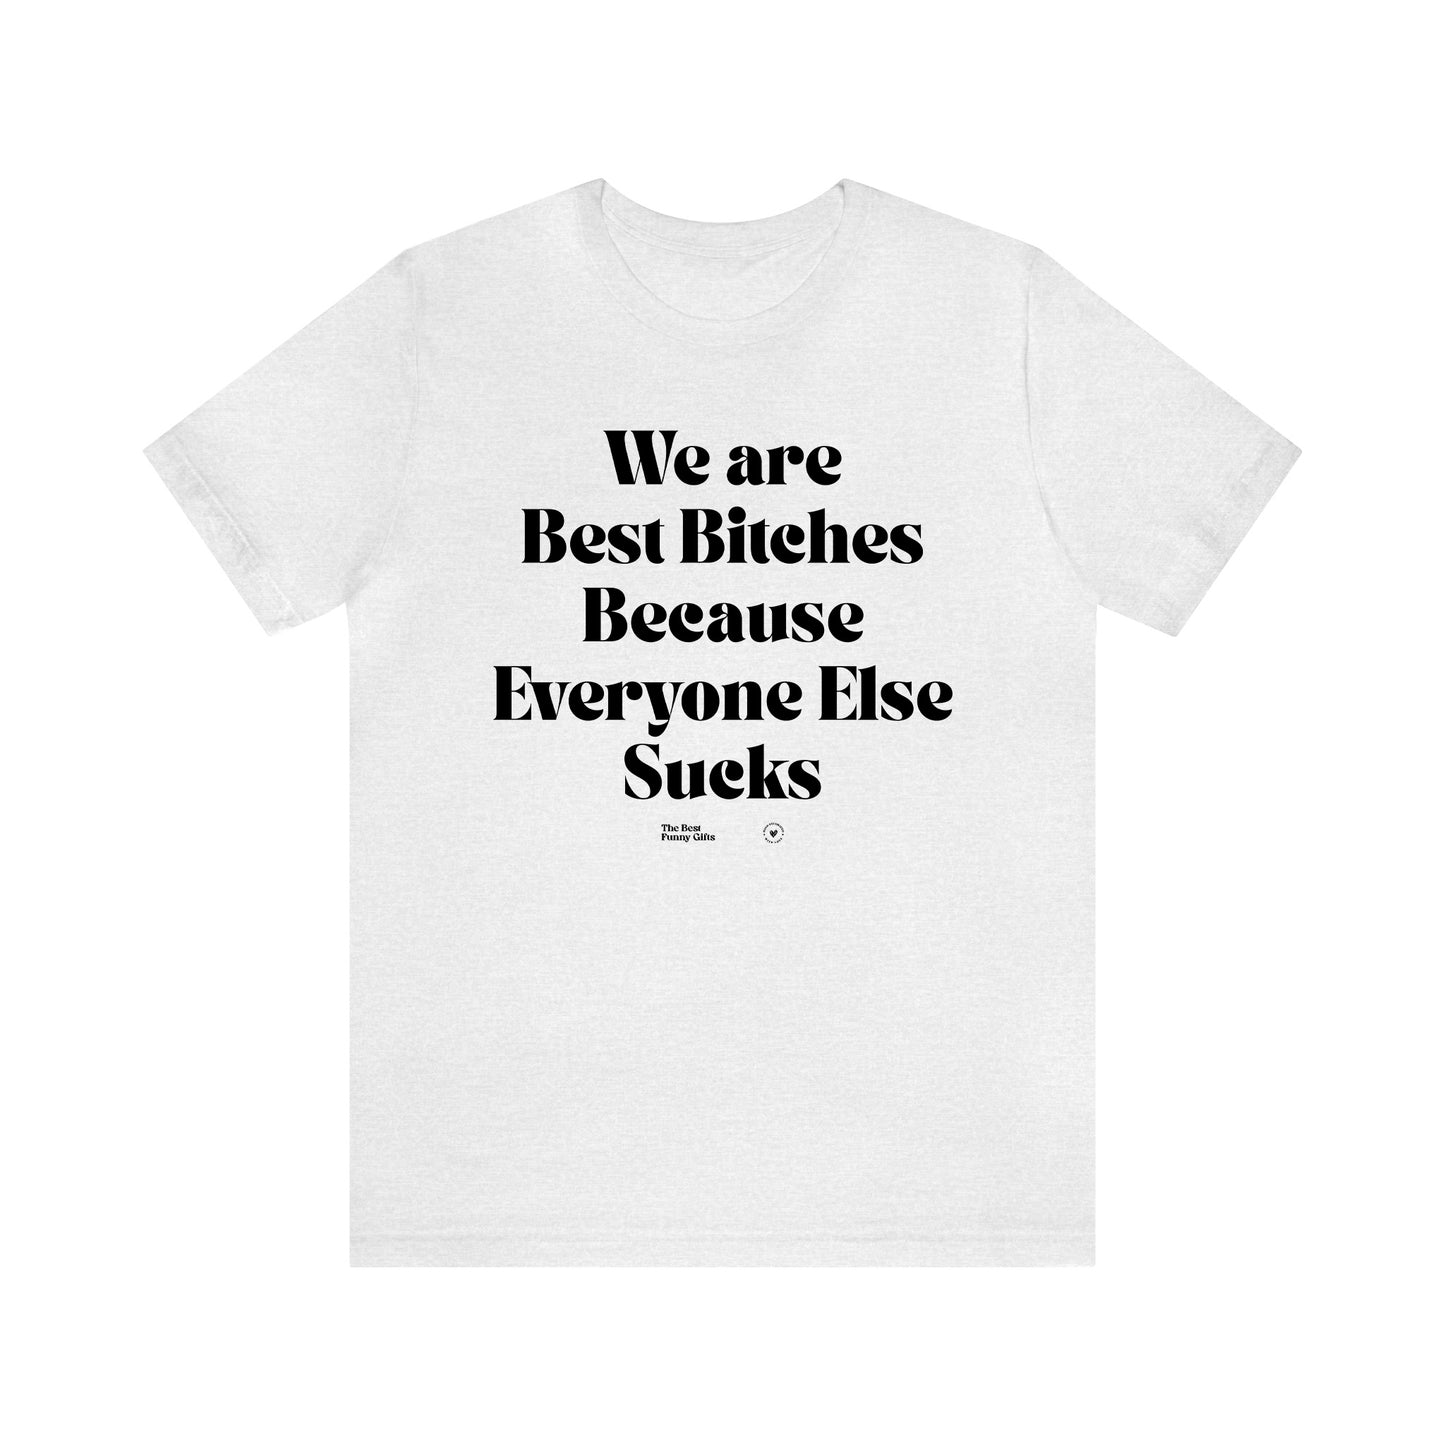 Funny Shirts for Women - We Are Best Bitches Because Everyone Else Sucks - Women’s T Shirts